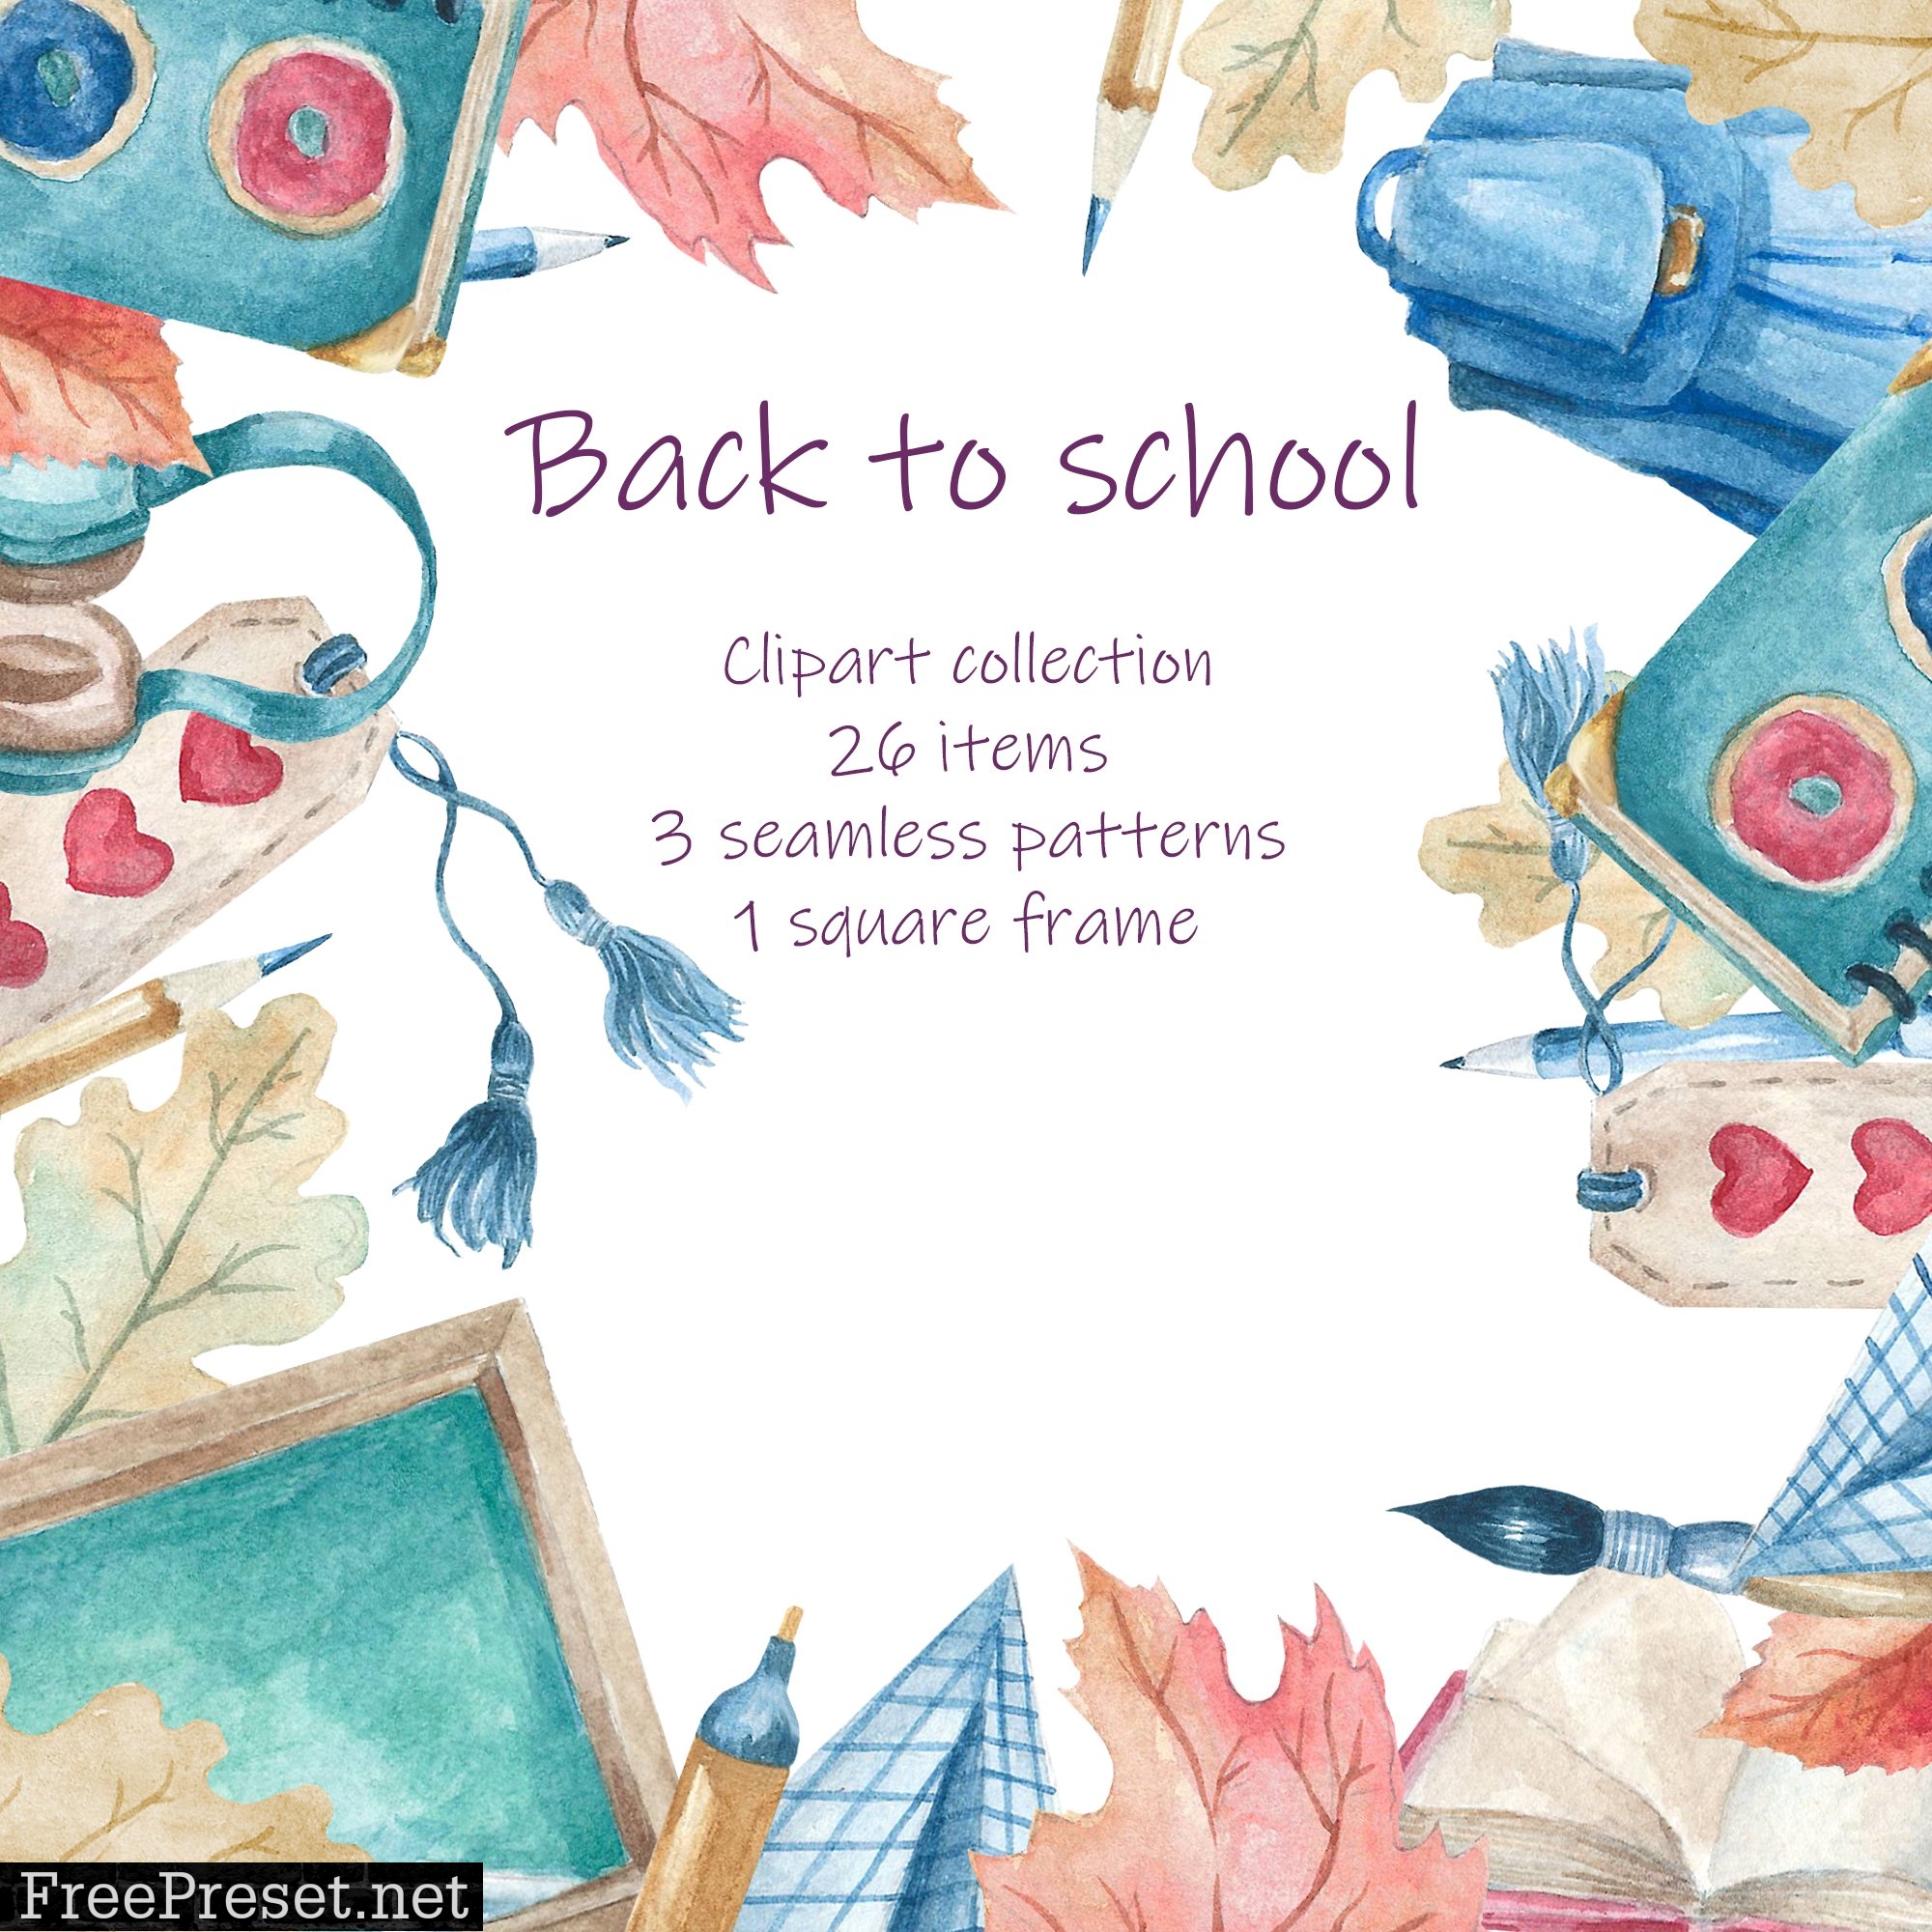 Back to school clipart 6290405